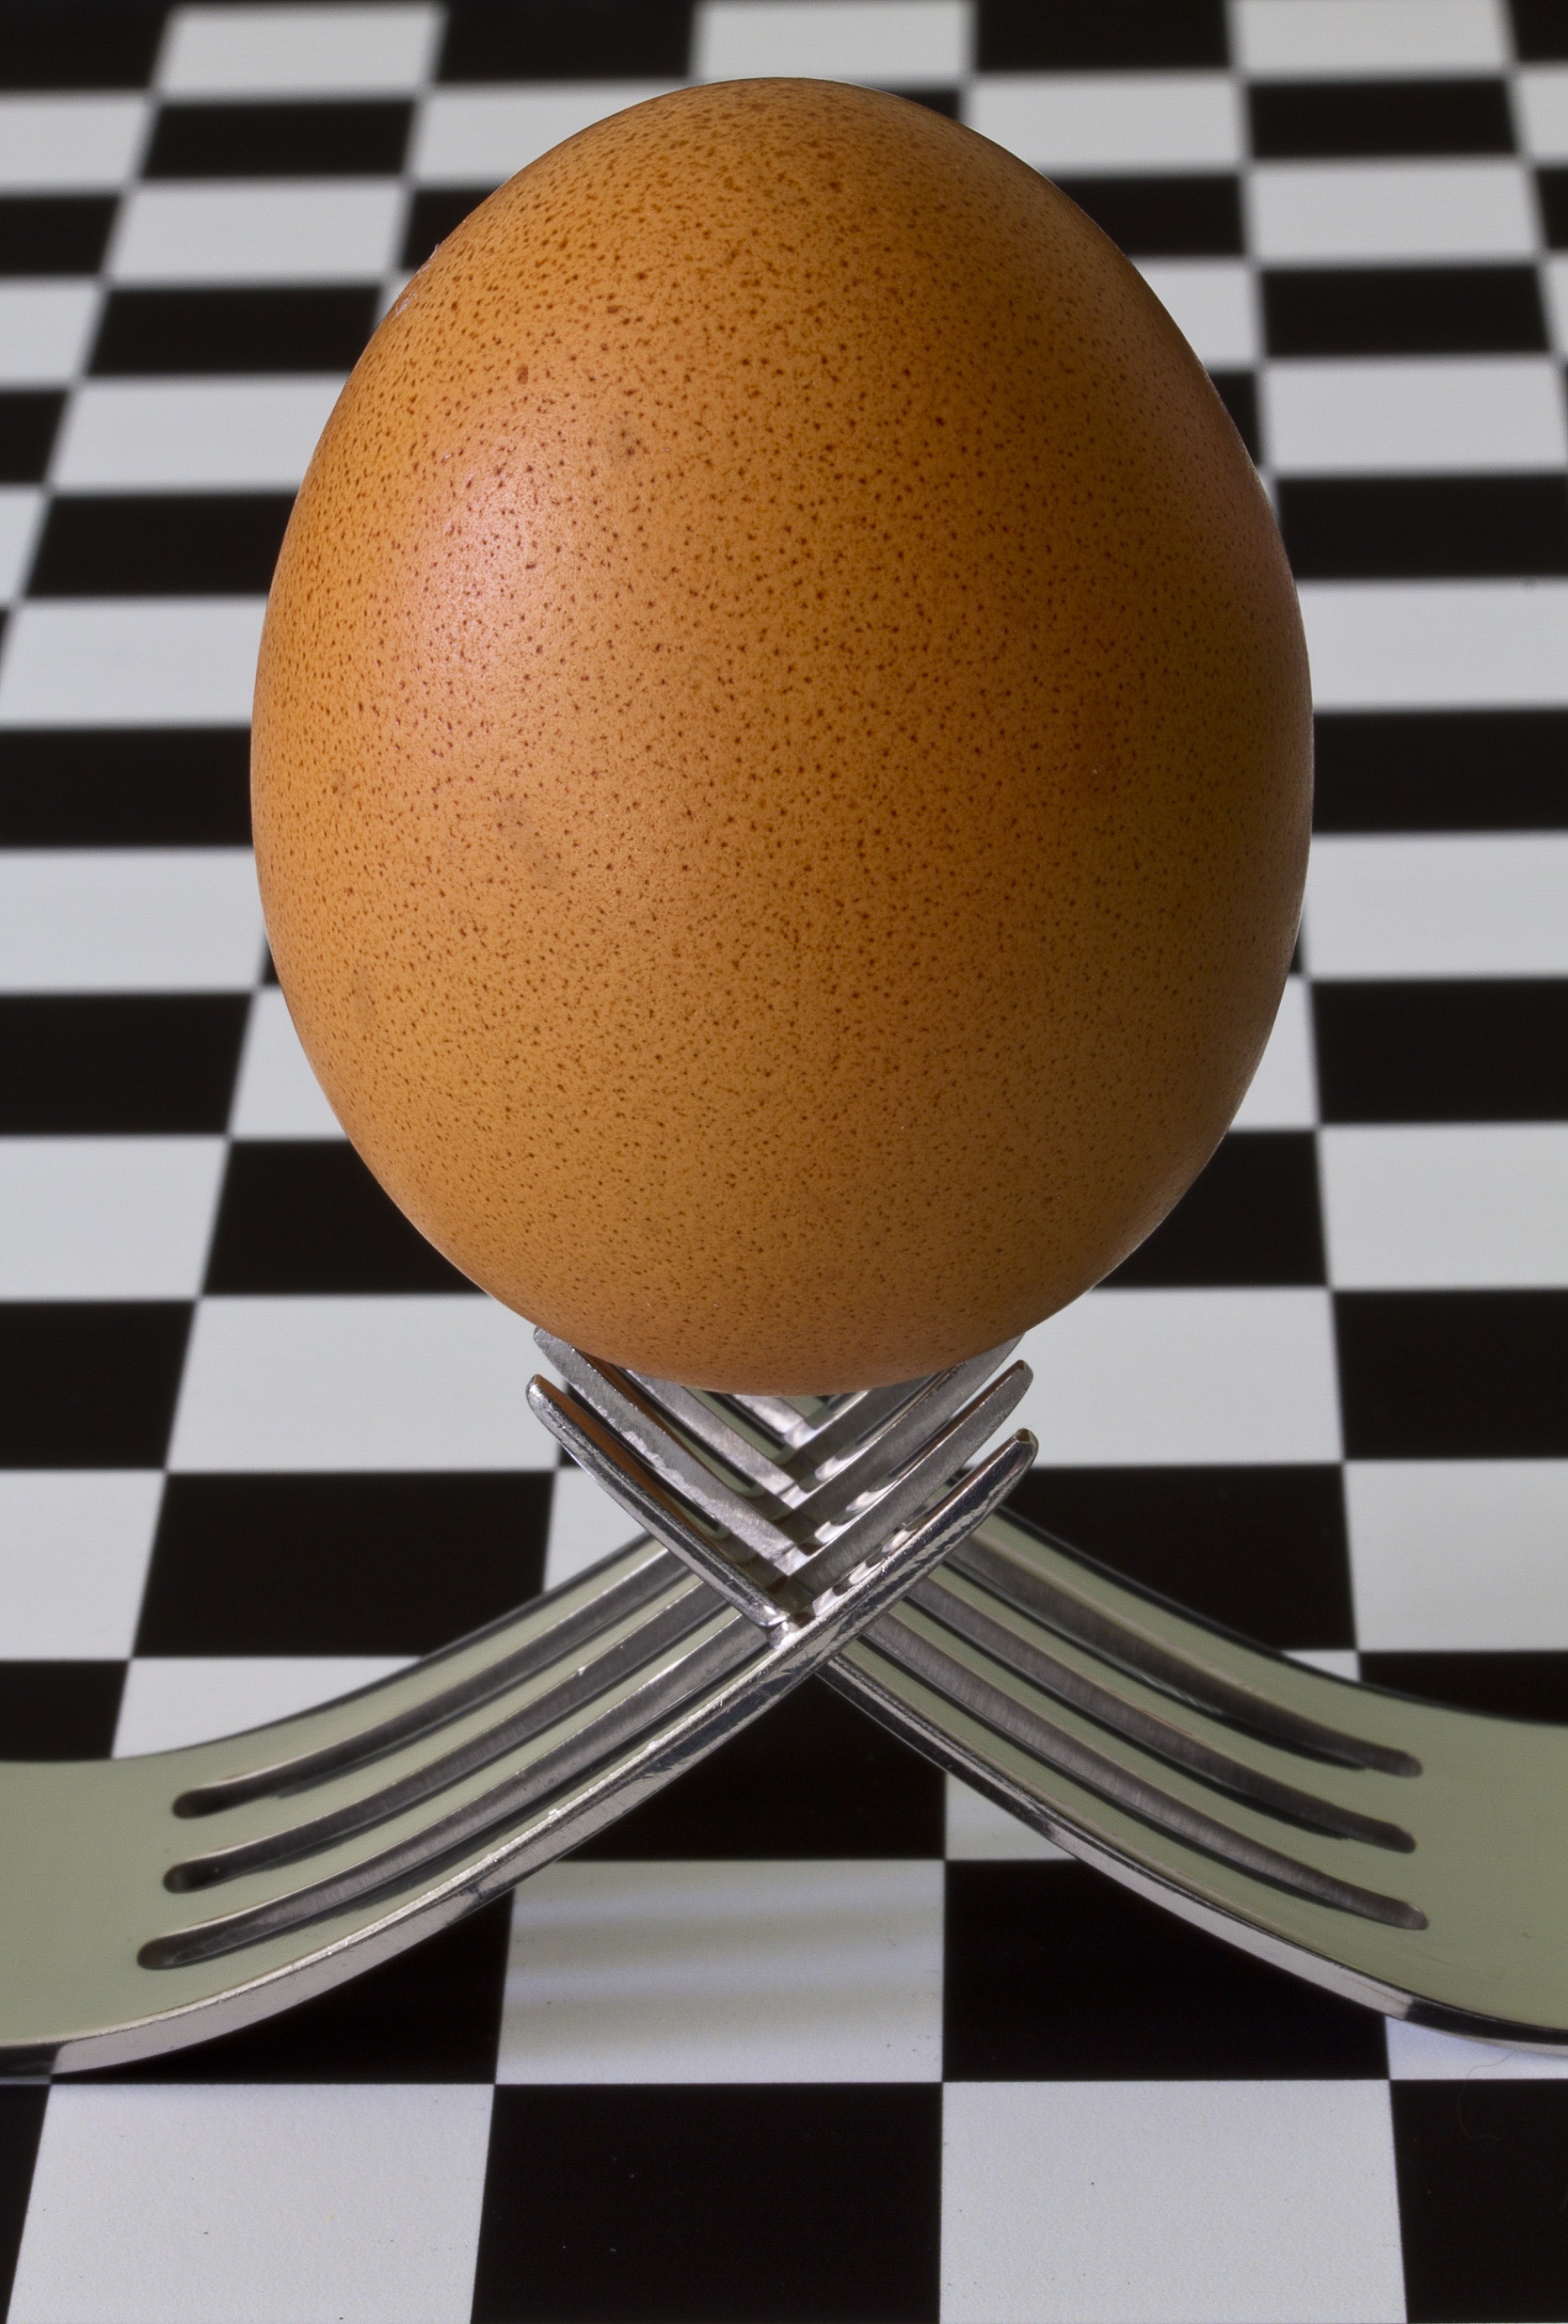 two stainless steel forks and brown egg